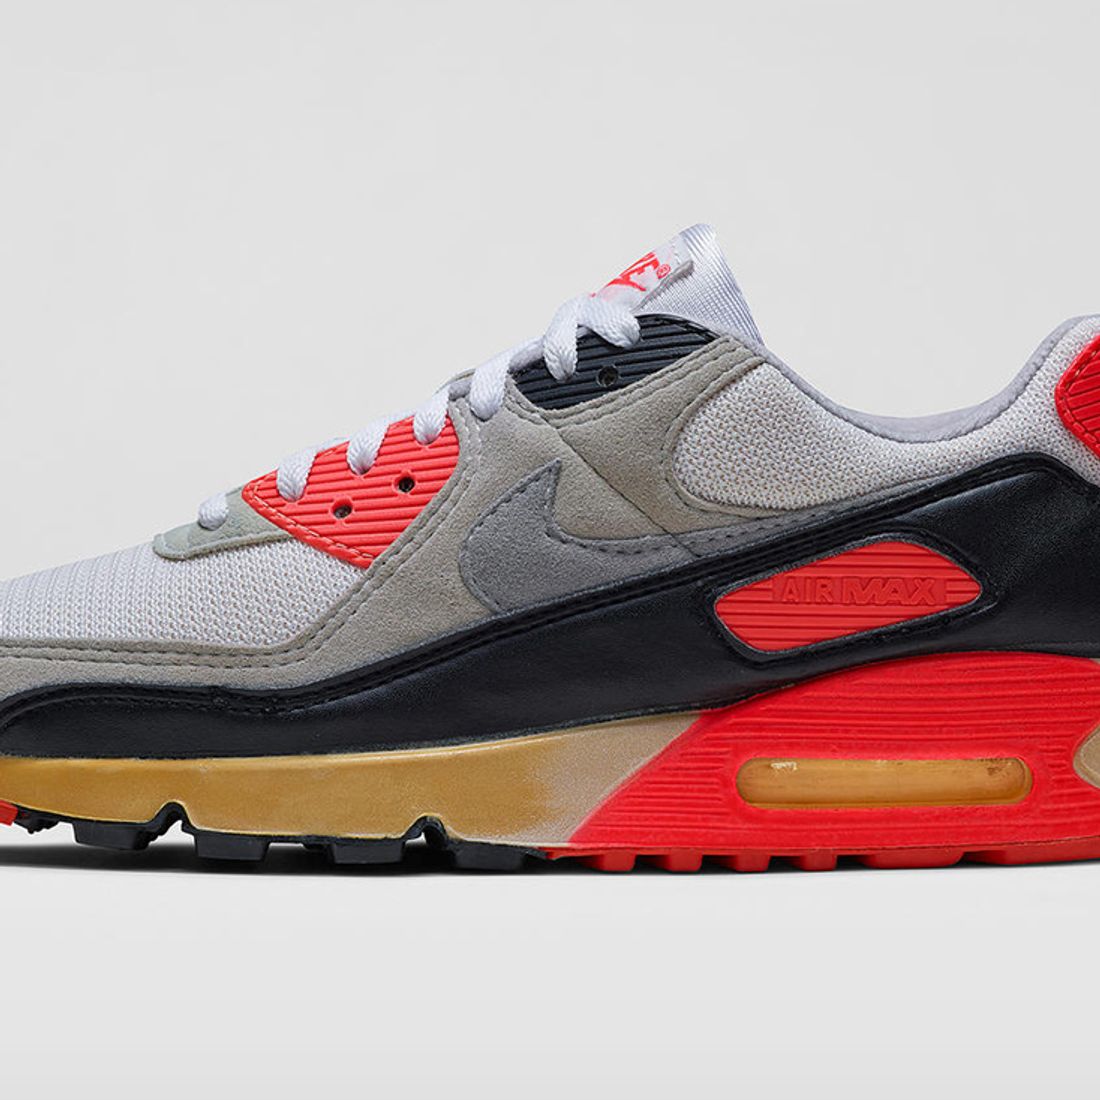 schuif armoede Geld rubber The All-Time Greatest Nike Air Max 90s: Part 1 - Sneaker Freaker